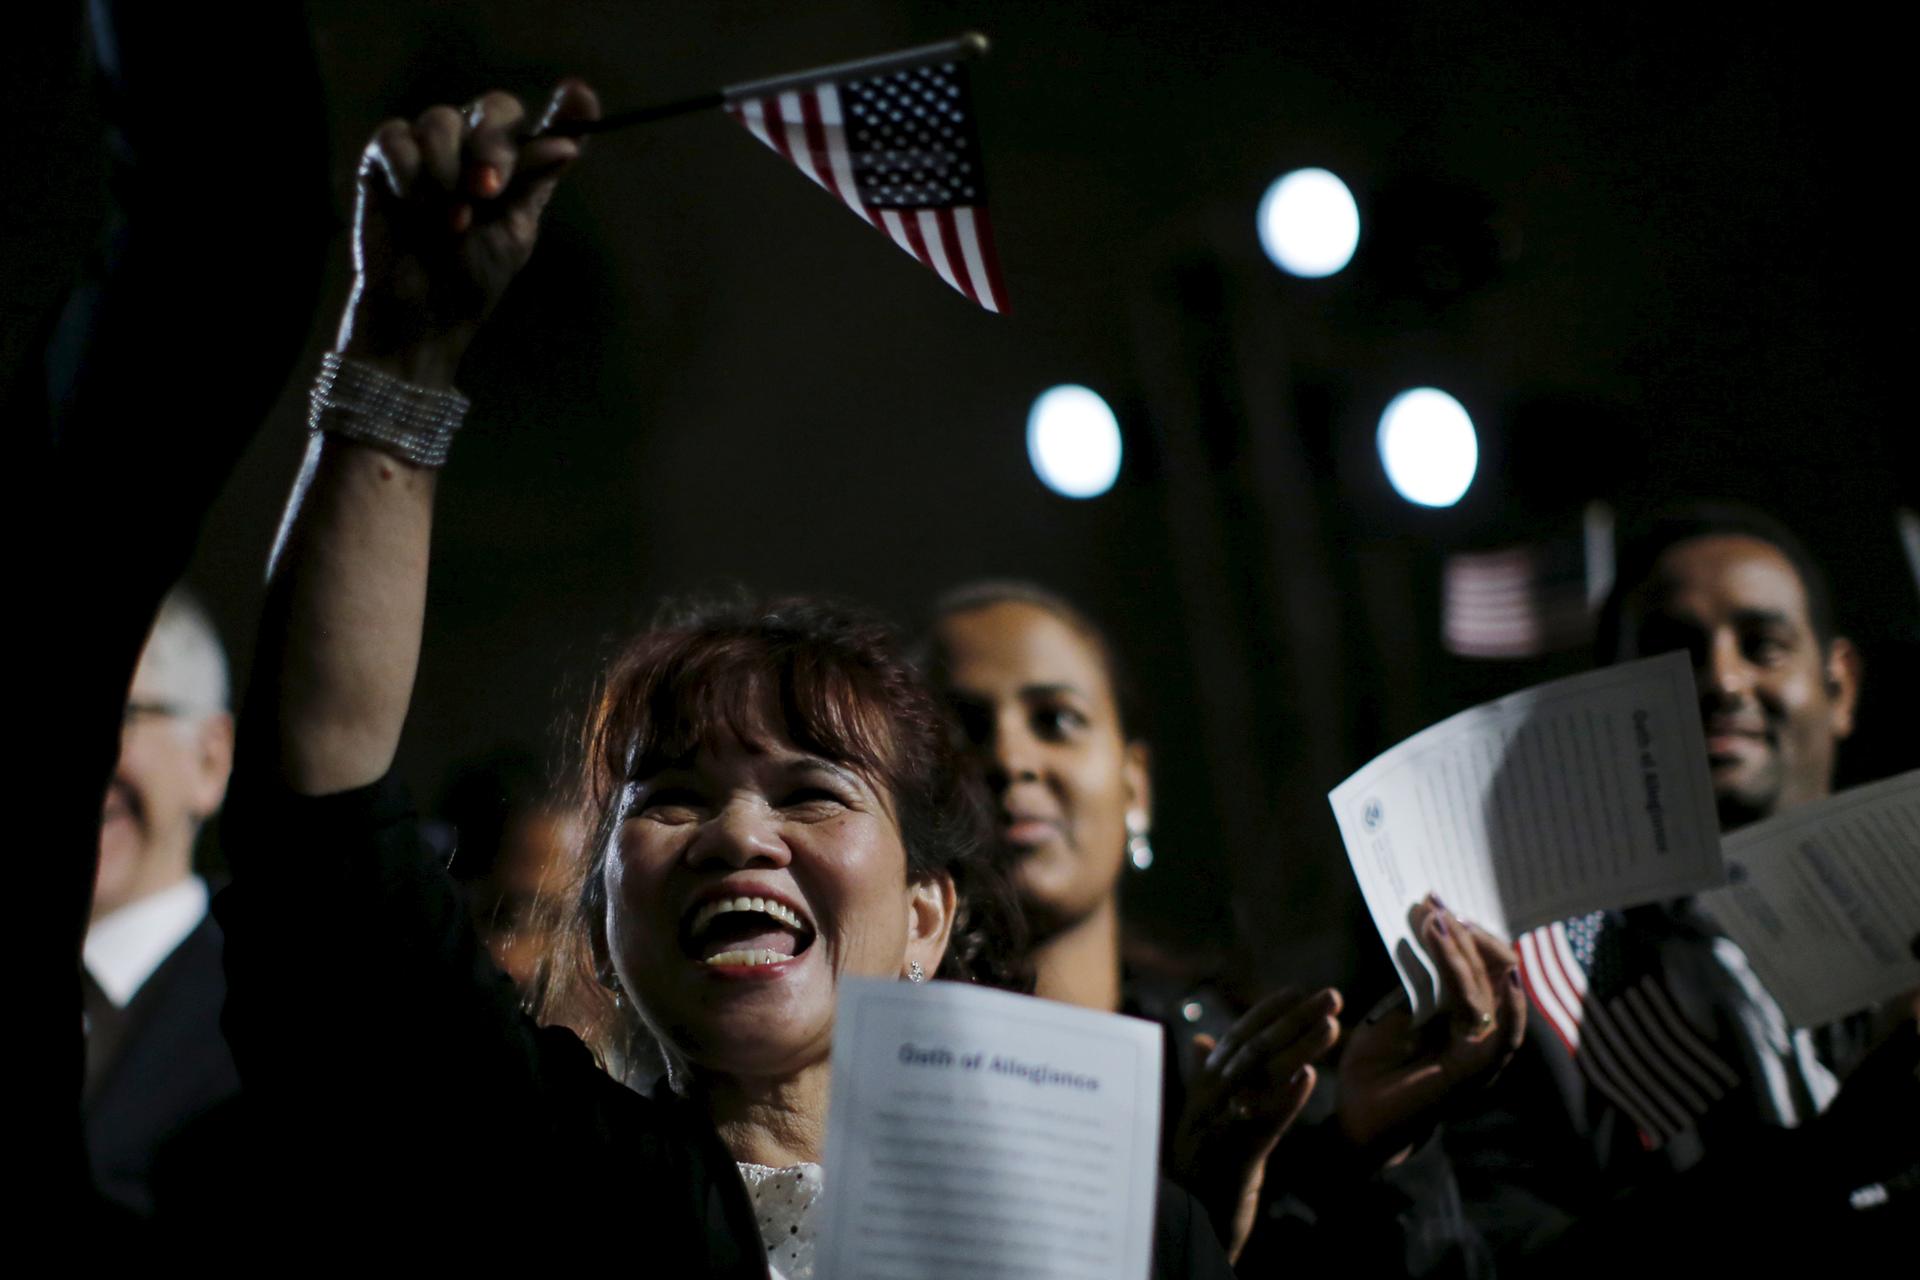 People celebrate as they become U.S. citizens during a naturalization ceremony at the National Archives Museum in Washington.